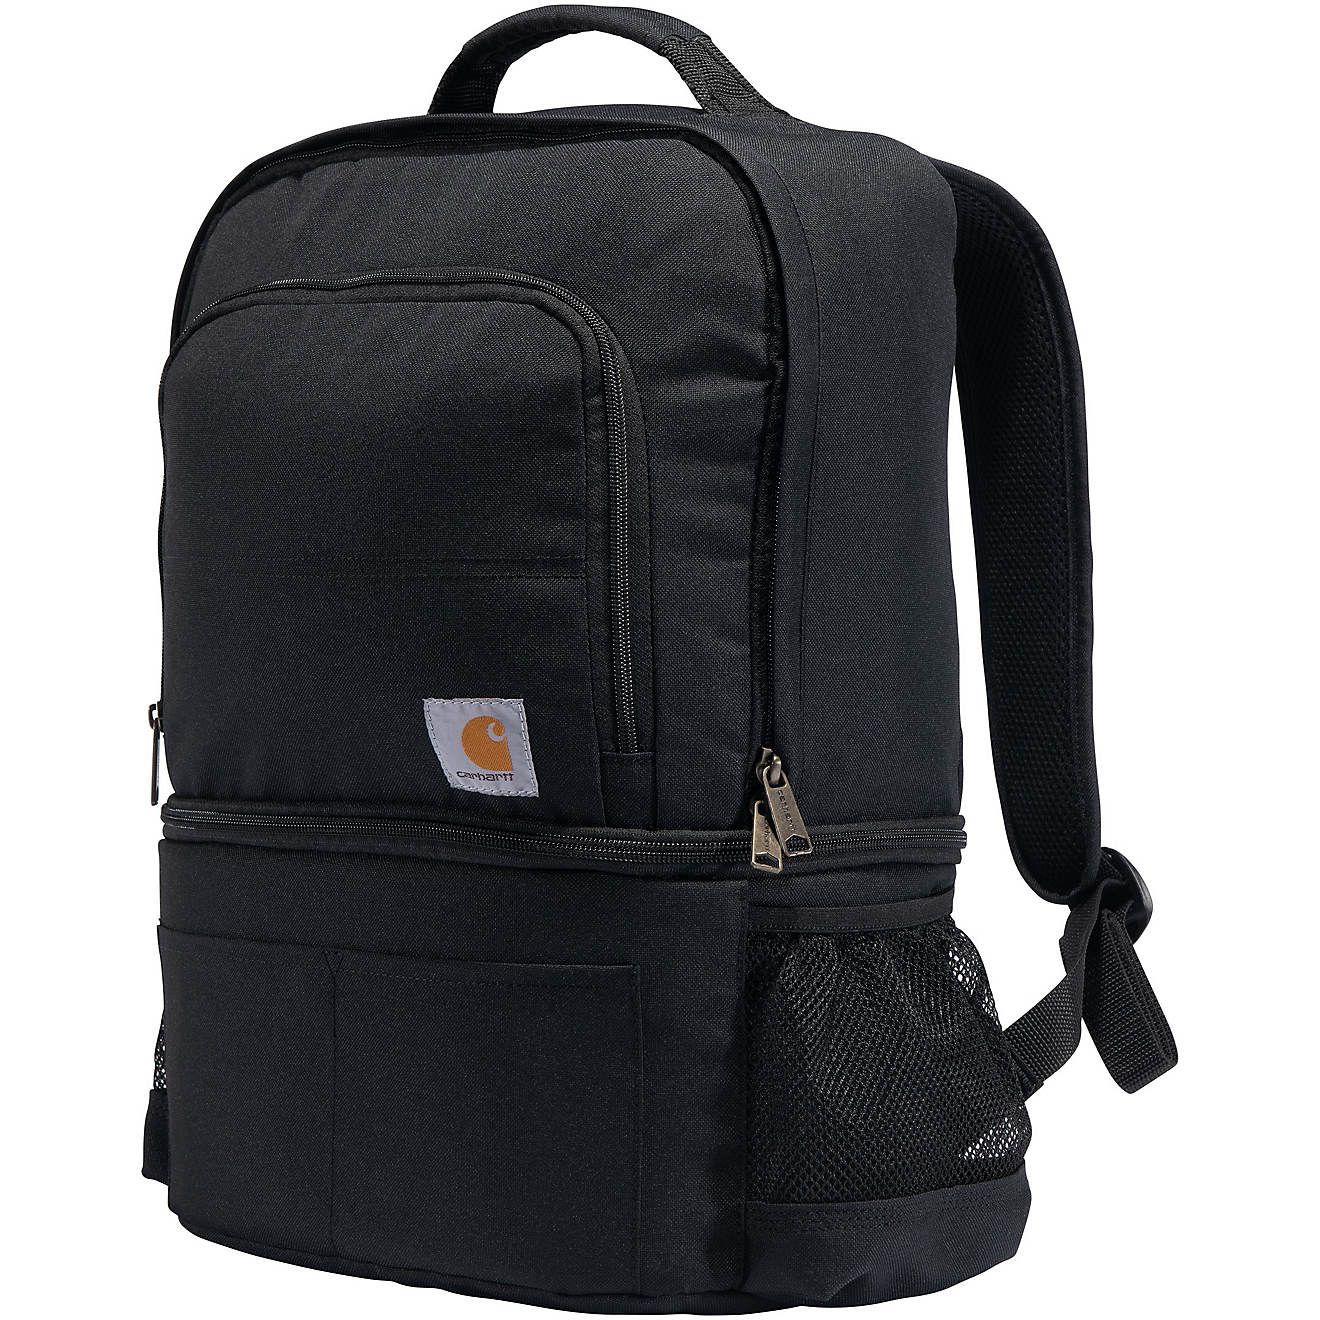 Carhartt Insulated 24 Can 2 Compartment Cooler Backpack | Academy | Academy Sports + Outdoors